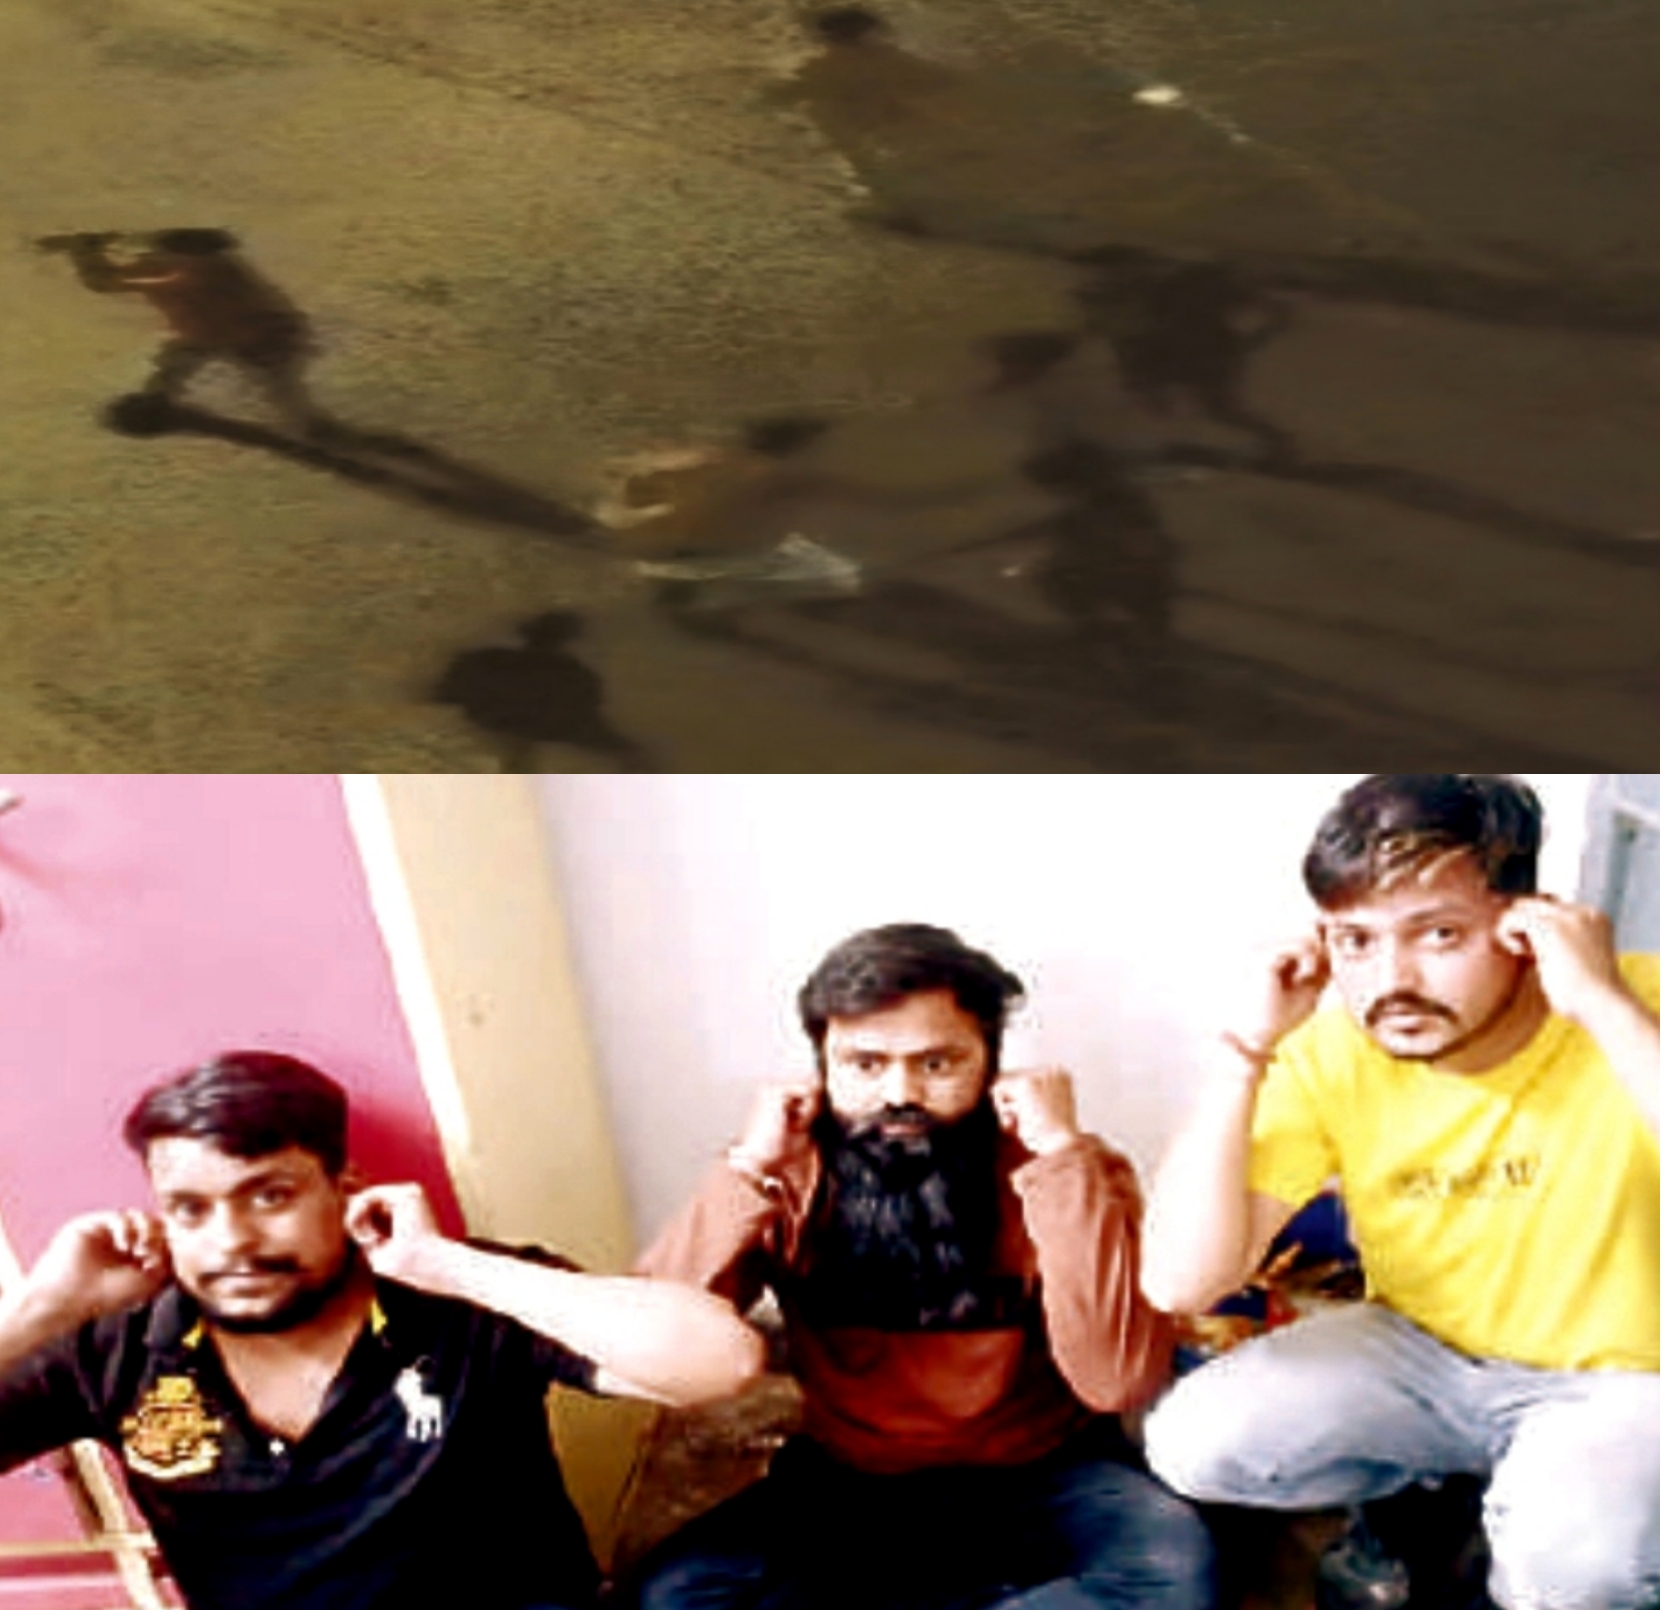 youth-clashed-near-kalpataru-shopping-center-late-night-apologized-by-holding-ear-in-the-police-station-2